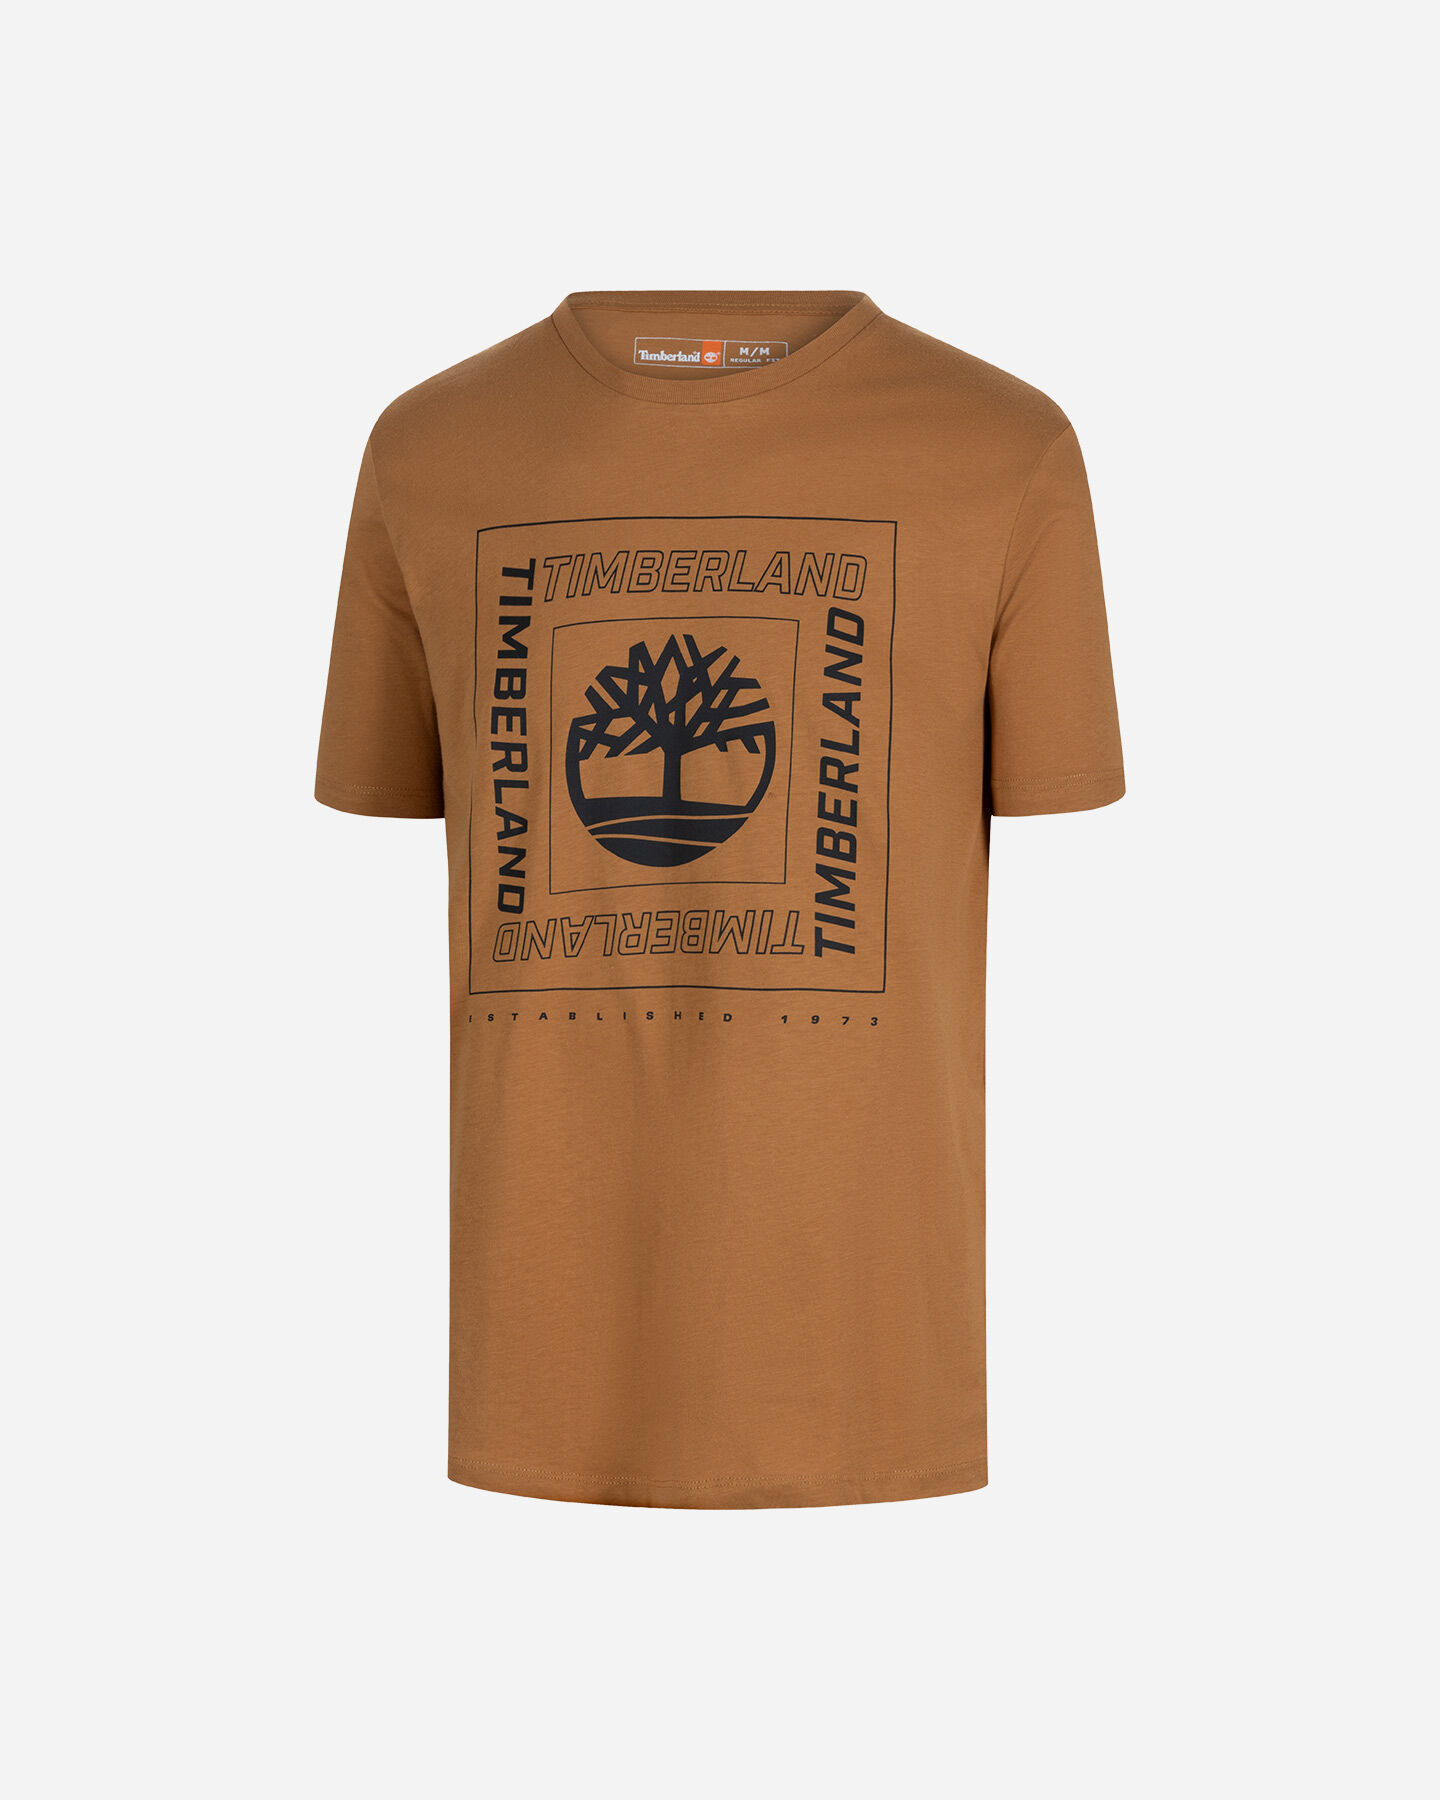  T-Shirt TIMBERLAND TREE LOGO M S4127276|P471|S scatto 0